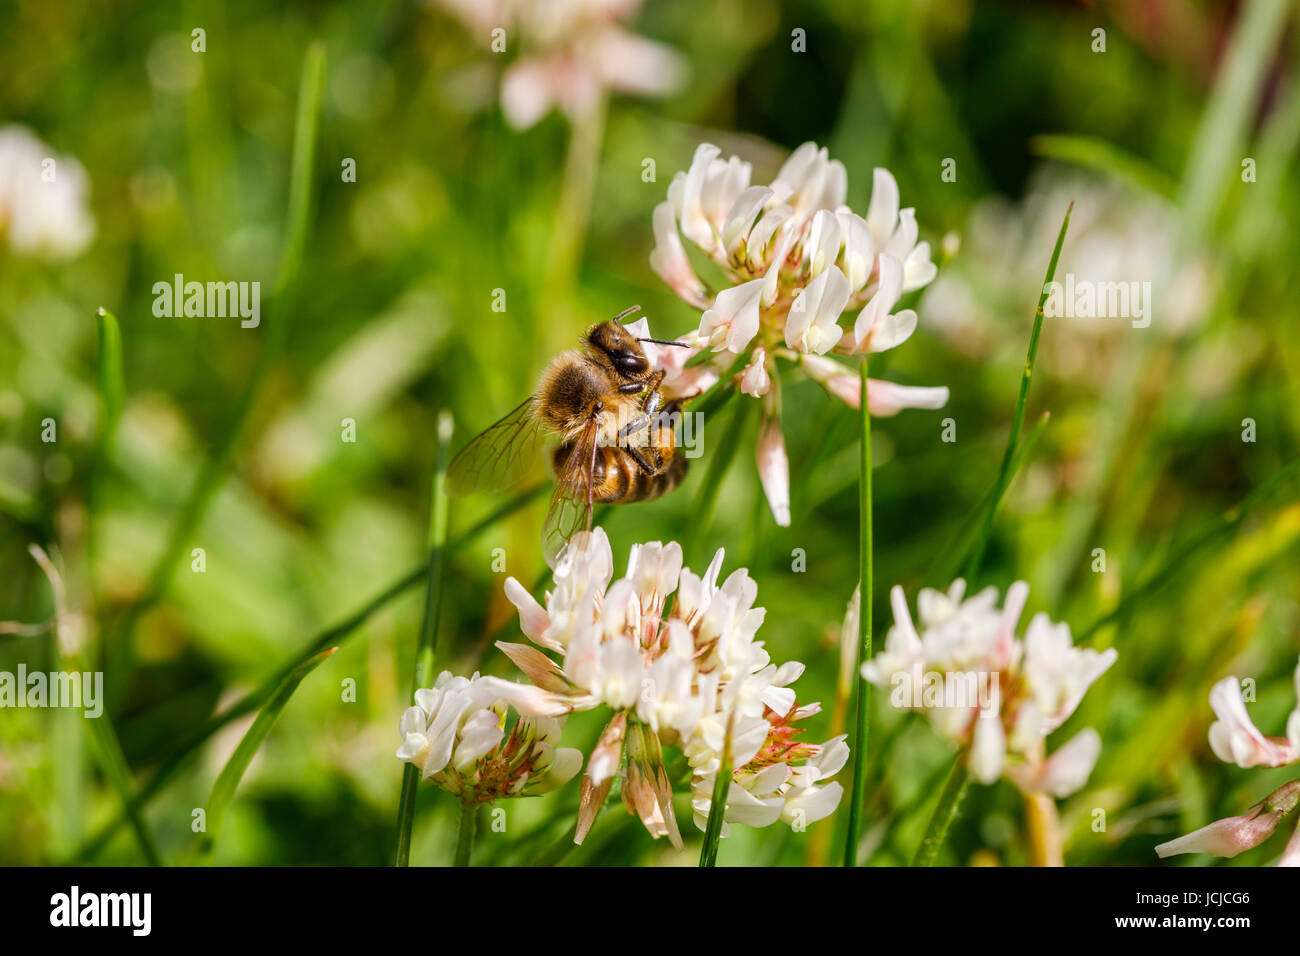 Western honey bee or European honey bee (Apis mellifera) collects nectar from and pollinates clover in early summer in southeast England, UK Stock Photo